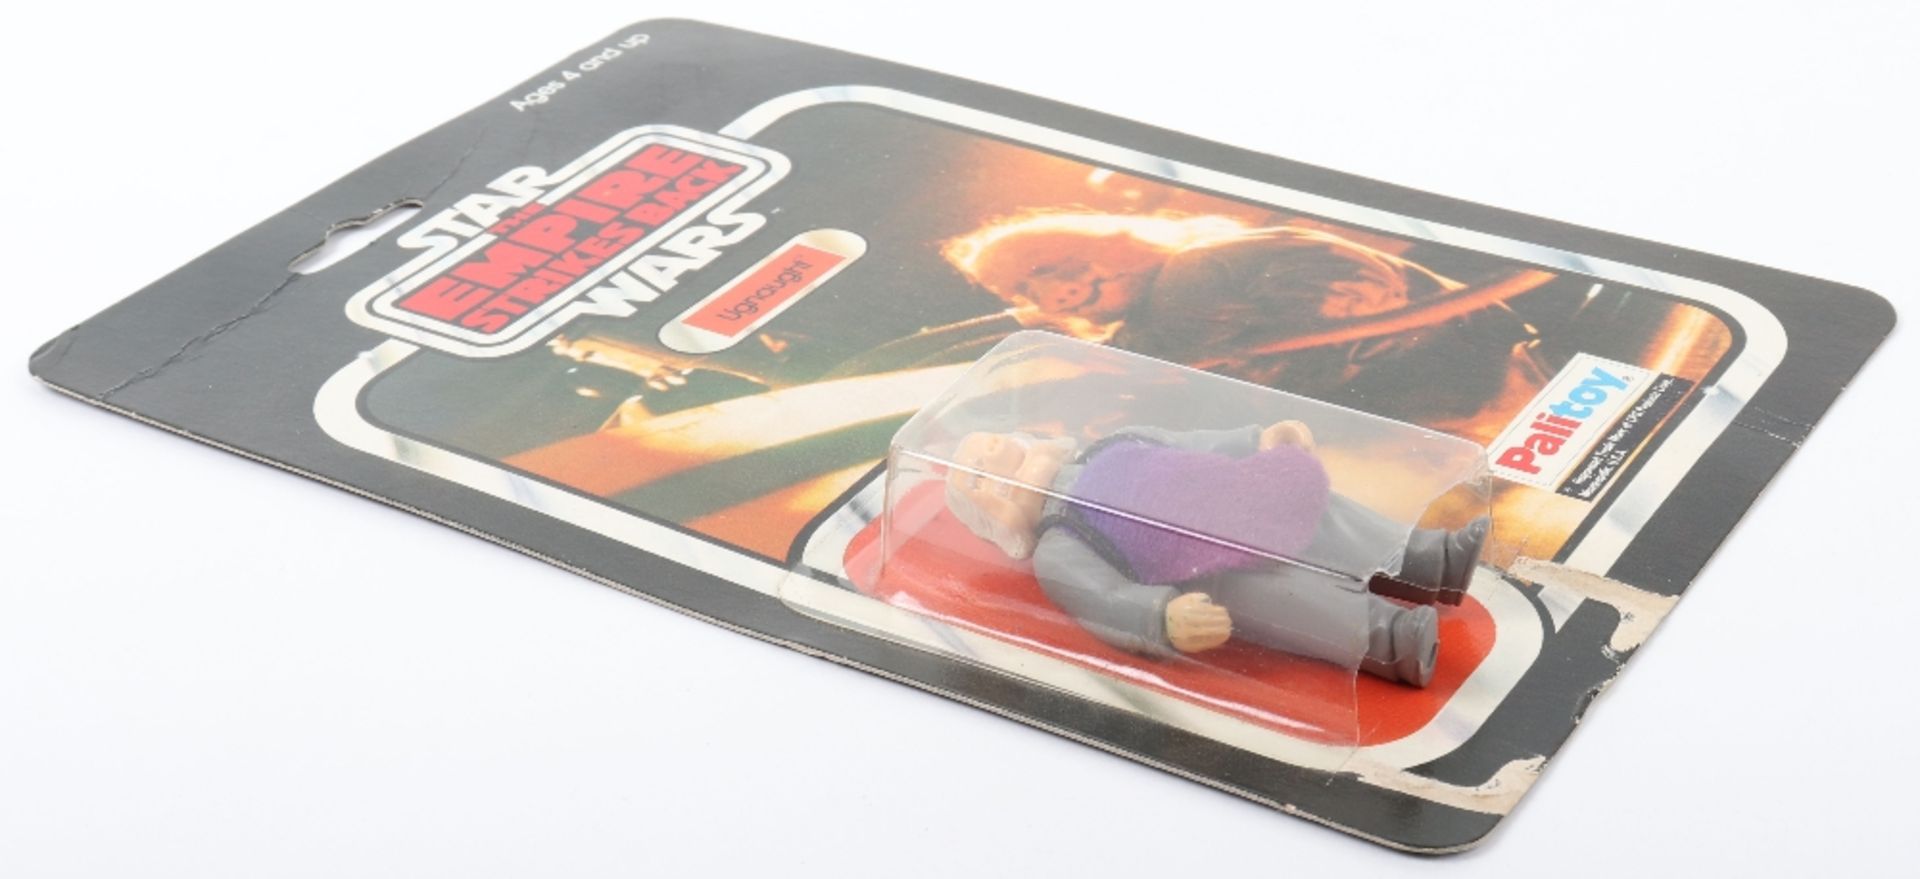 Palitoy Star Wars The Empire Strikes Back Ugnaught Vintage Original Carded Figure - Image 4 of 6